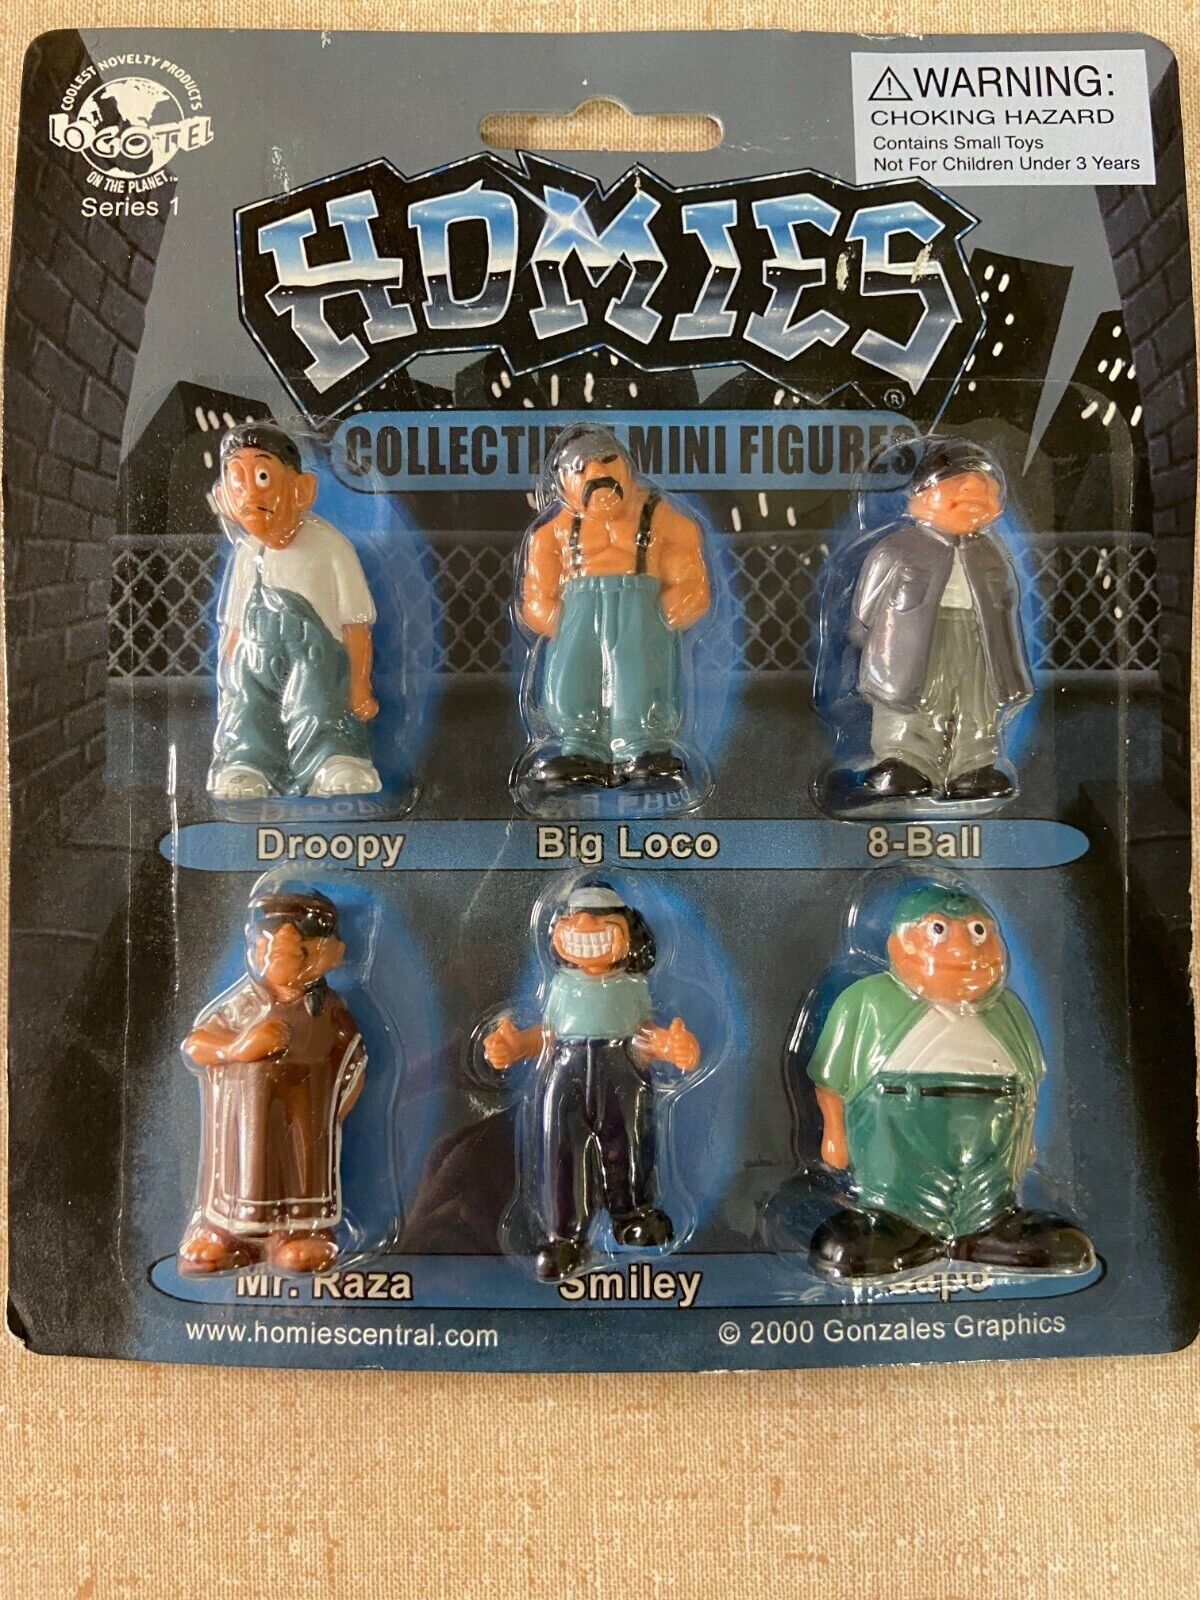 Homies Series 1 The Original 6 Figures That Got It All Started! 